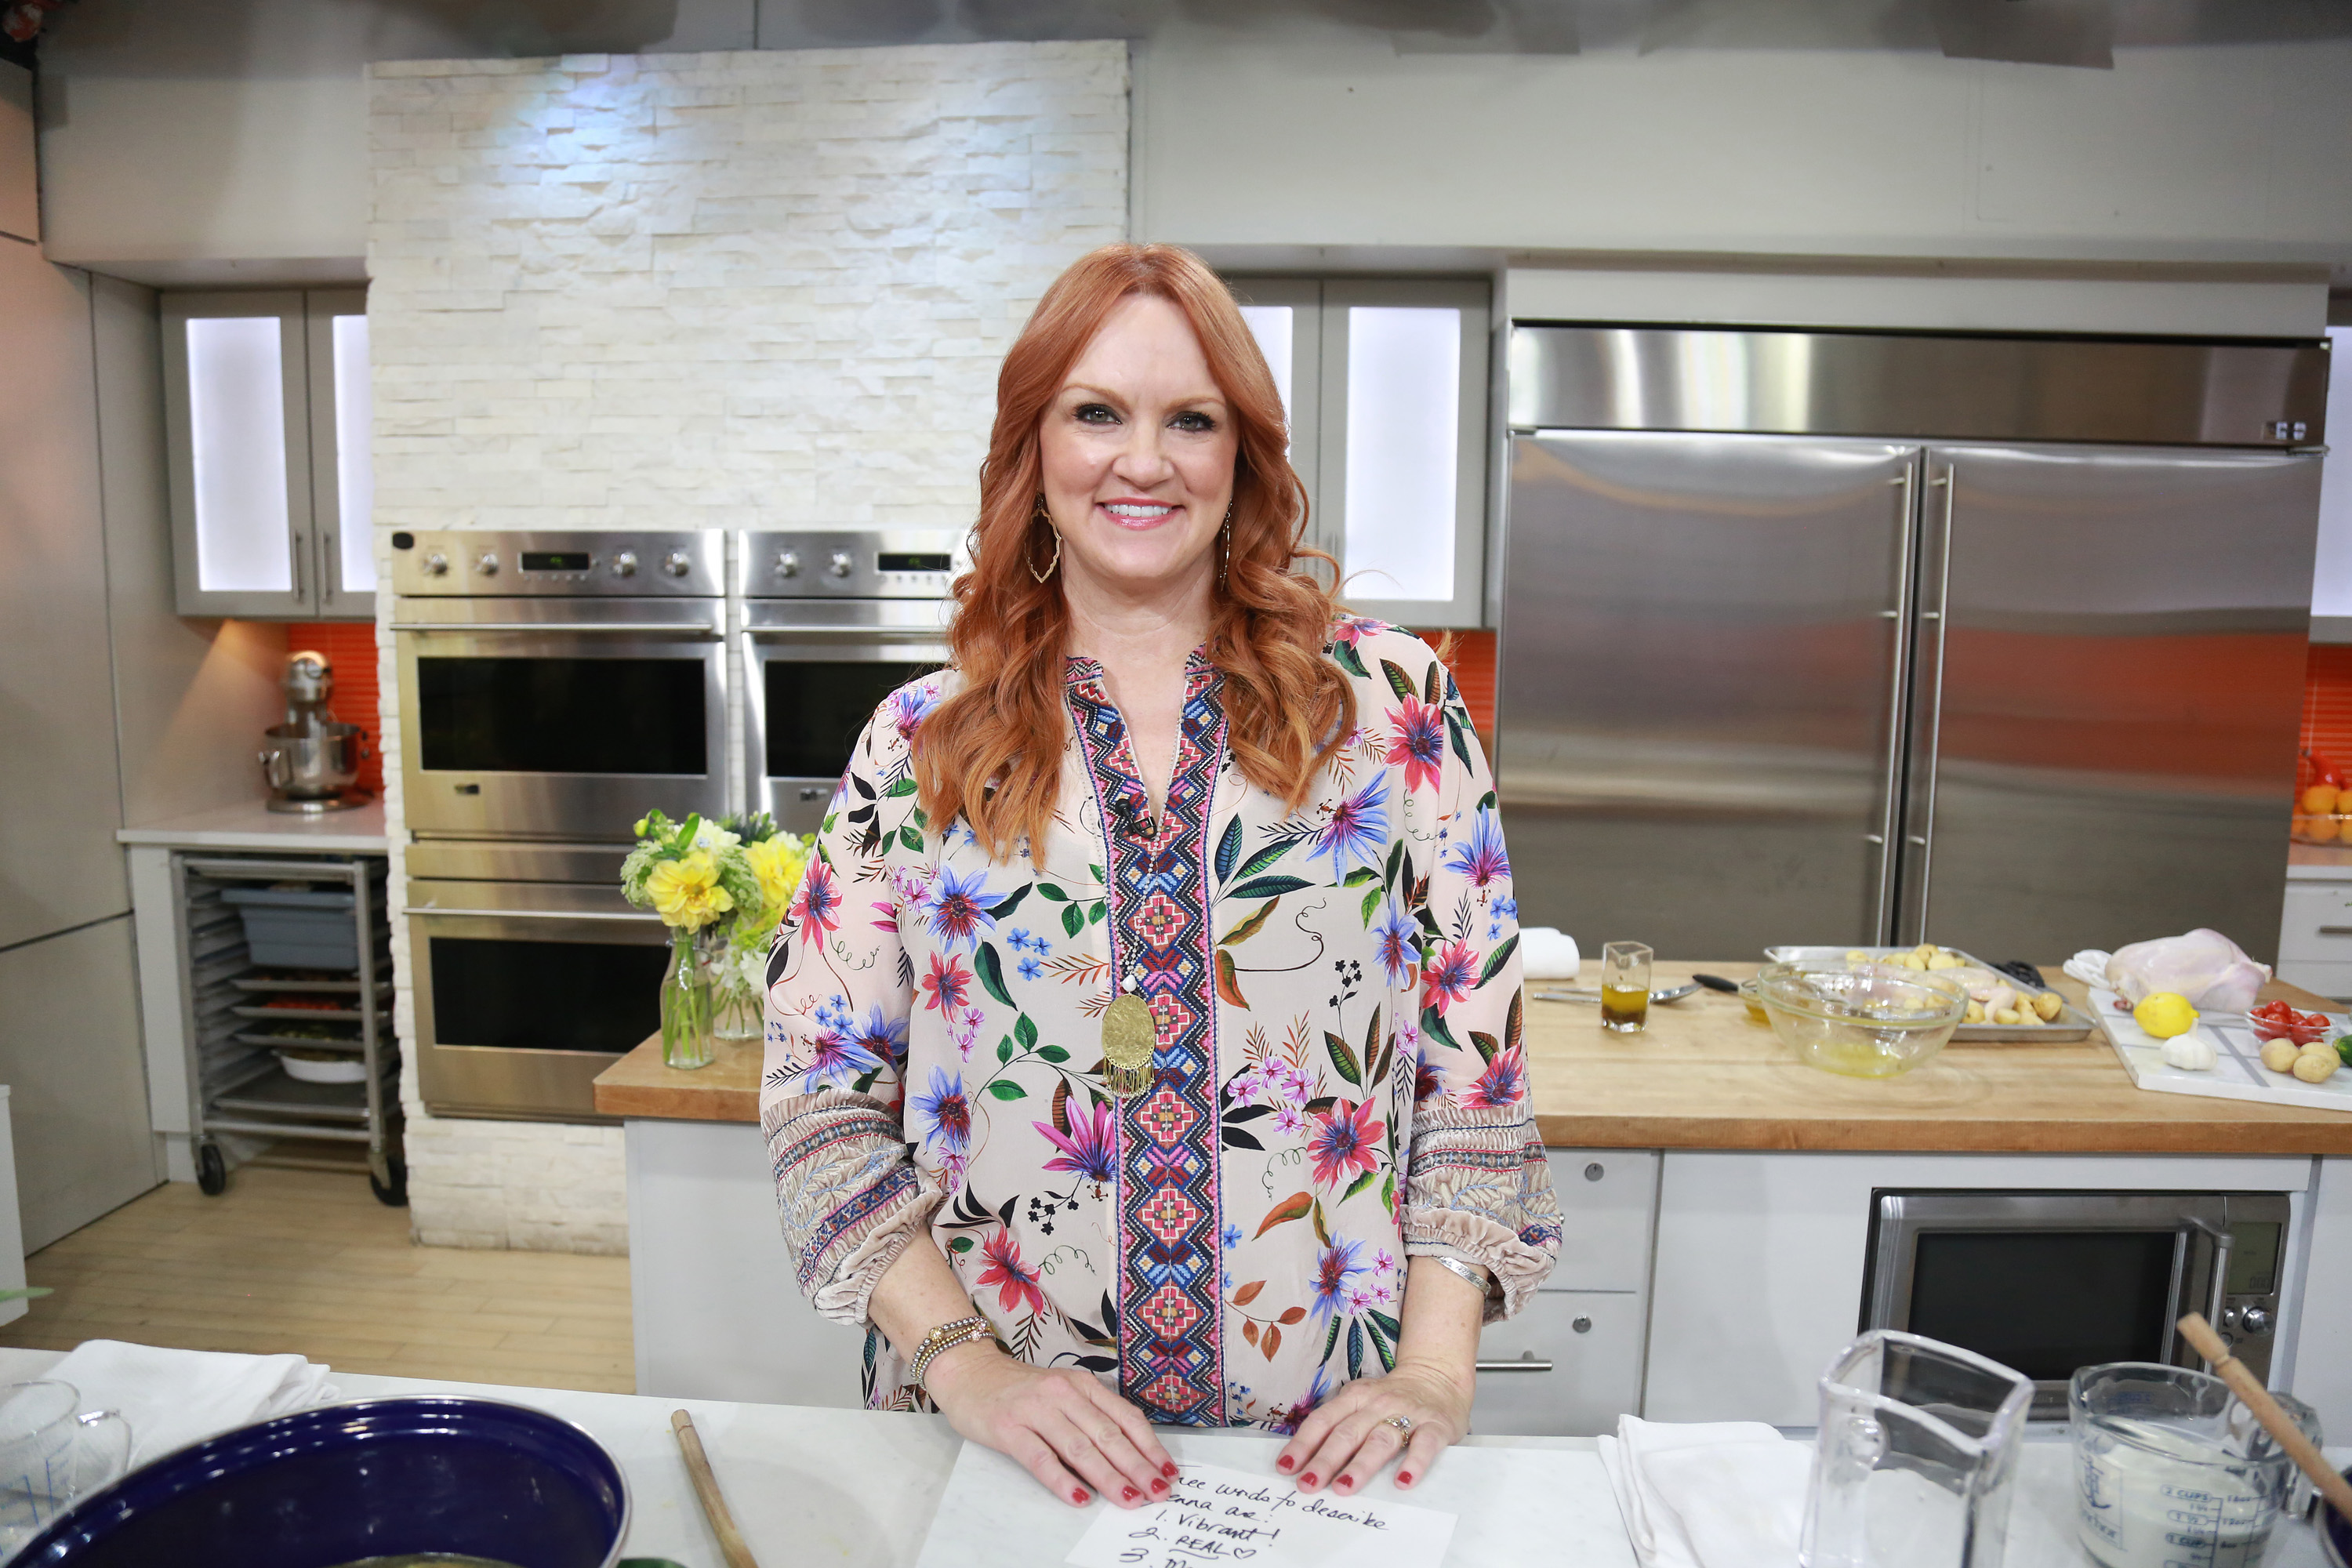 Food Network star Ree Drummond wears a long-sleeved floral blouse in this photograph.